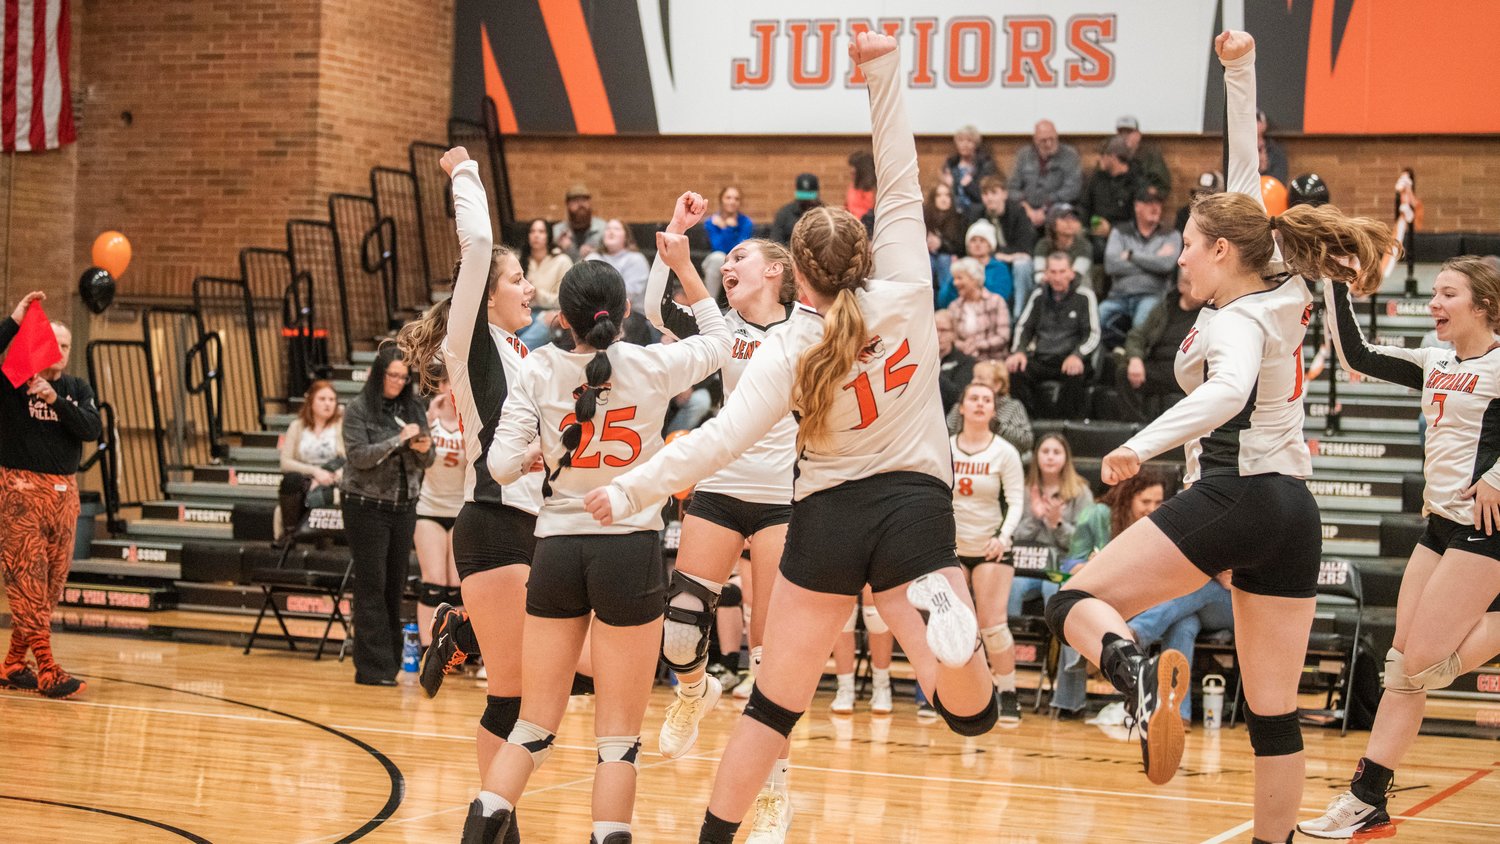 Tigers celebrate a point Thursday night during a volleyball match against Rochester.